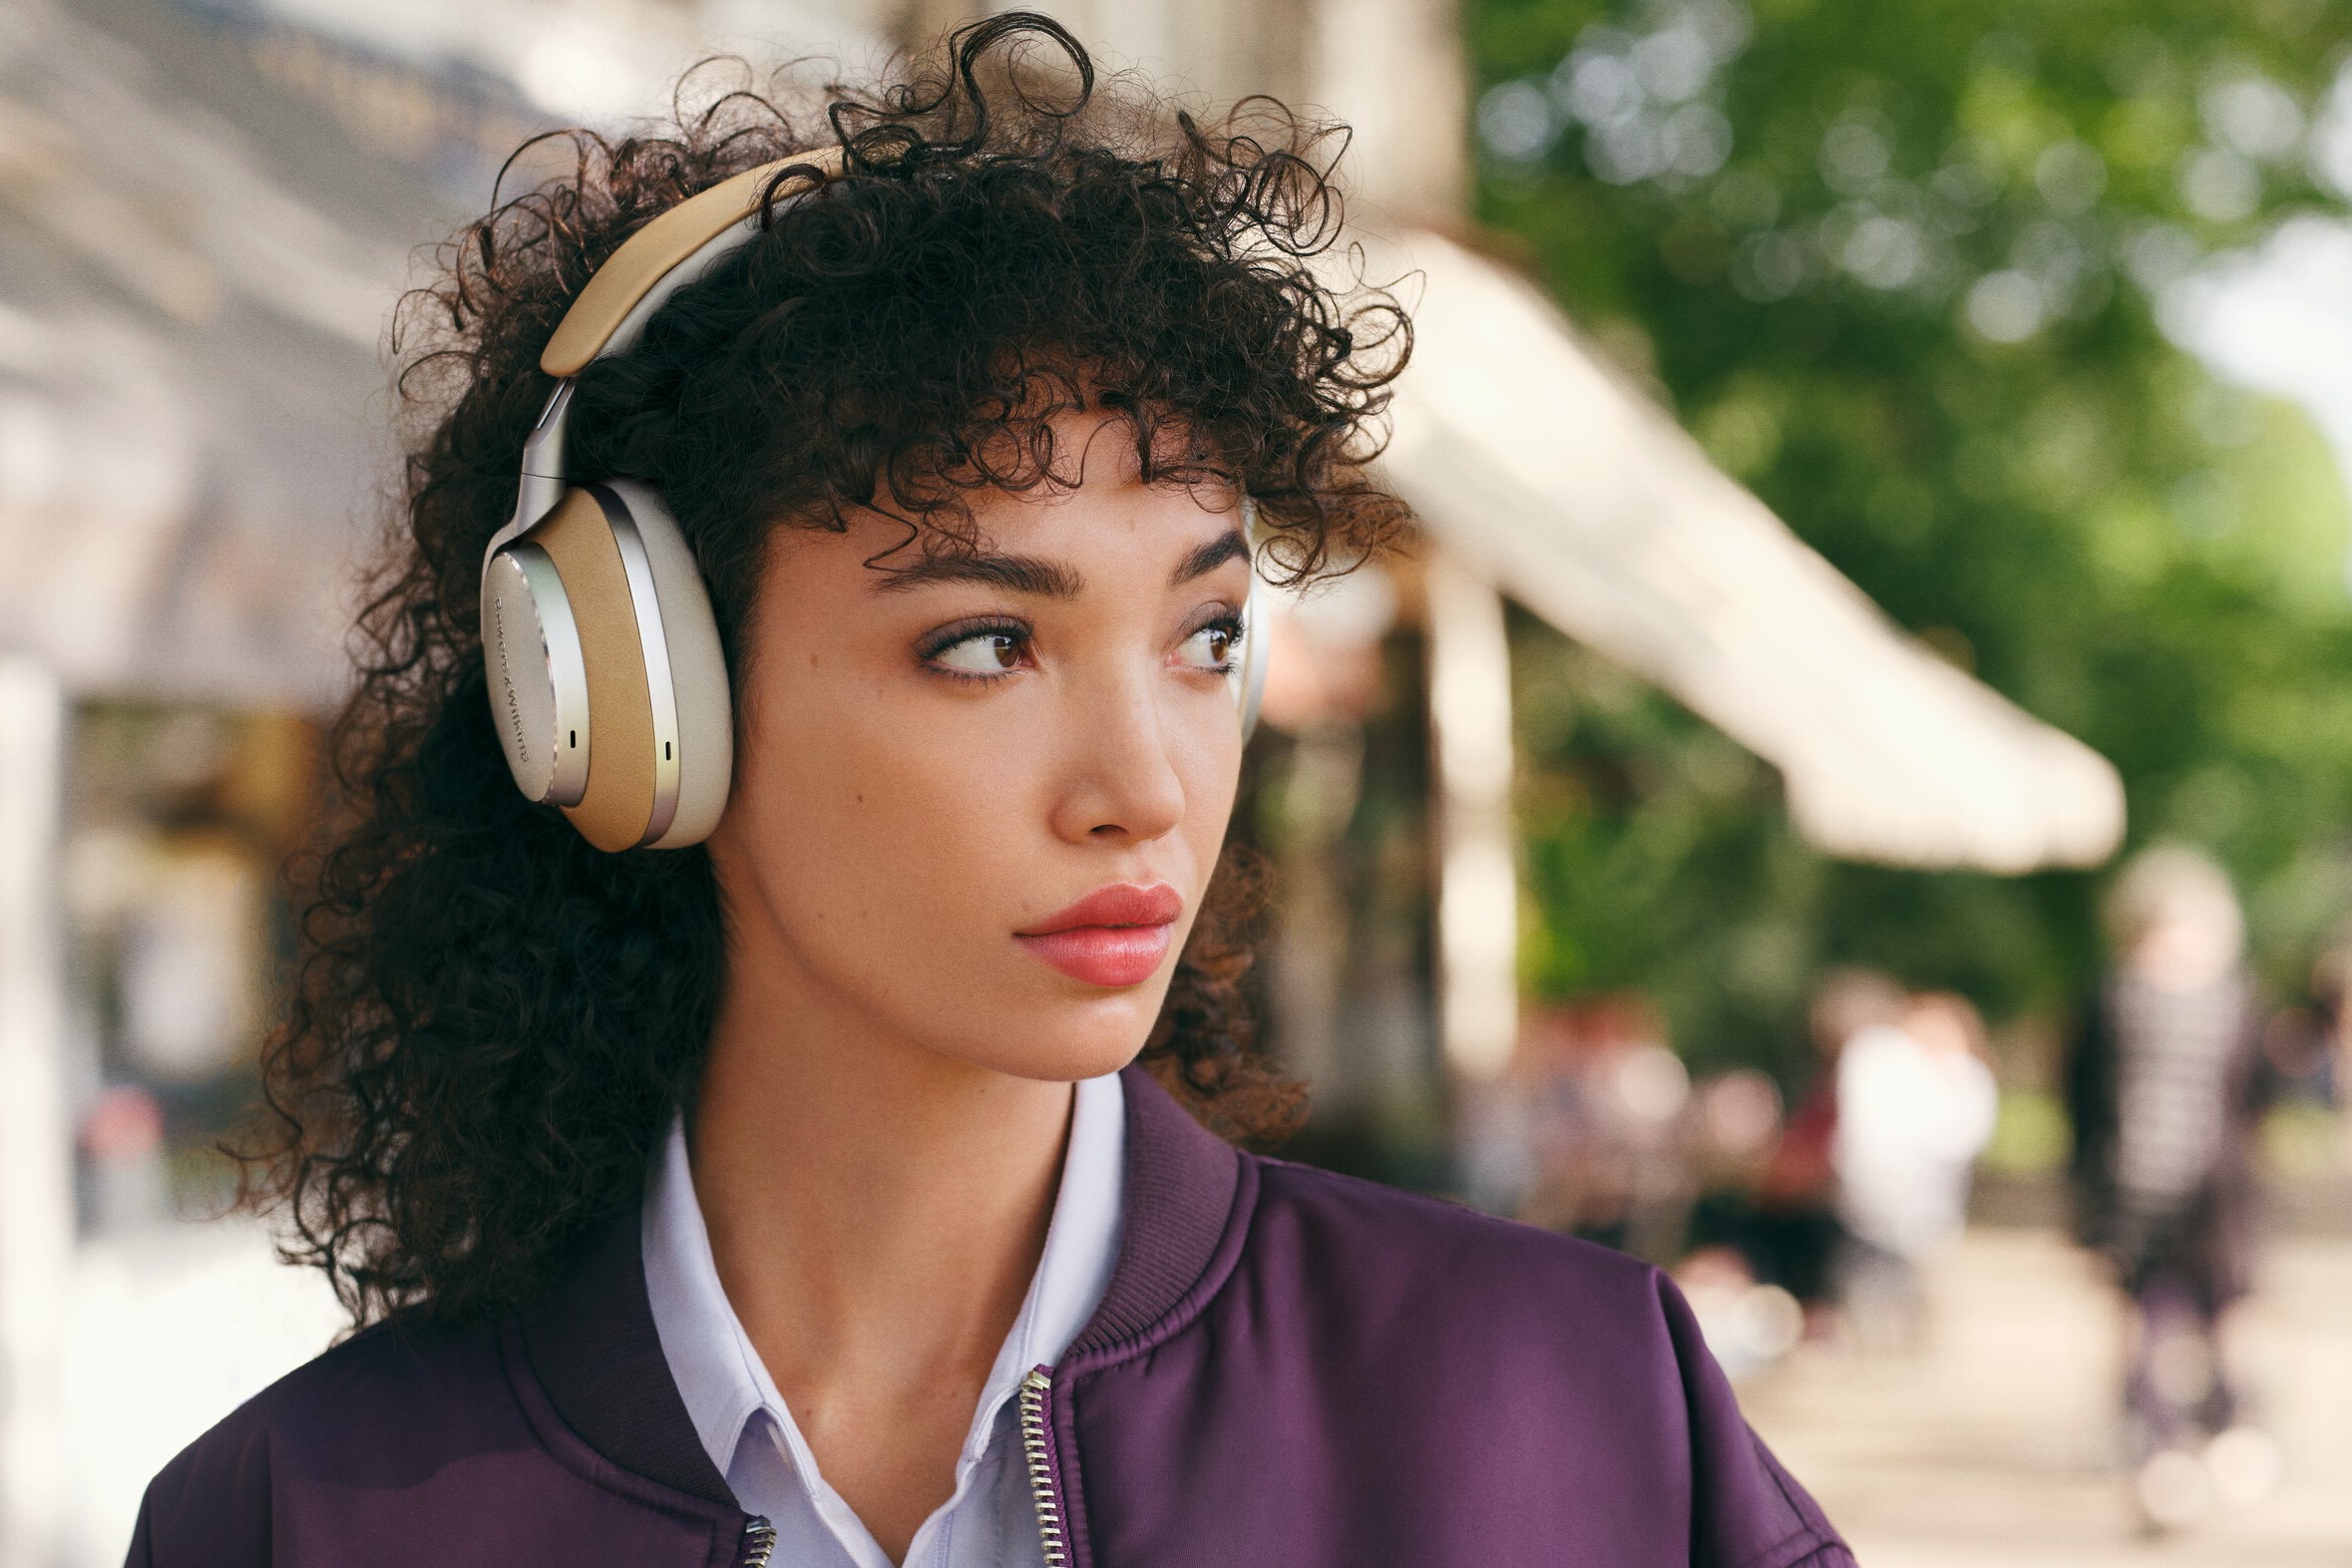 Bowers & Wilkins’ New Px8 Is A Flagship Wireless Noise Cancelling Headphone With Drivers Based Upon Their High-End Speakers